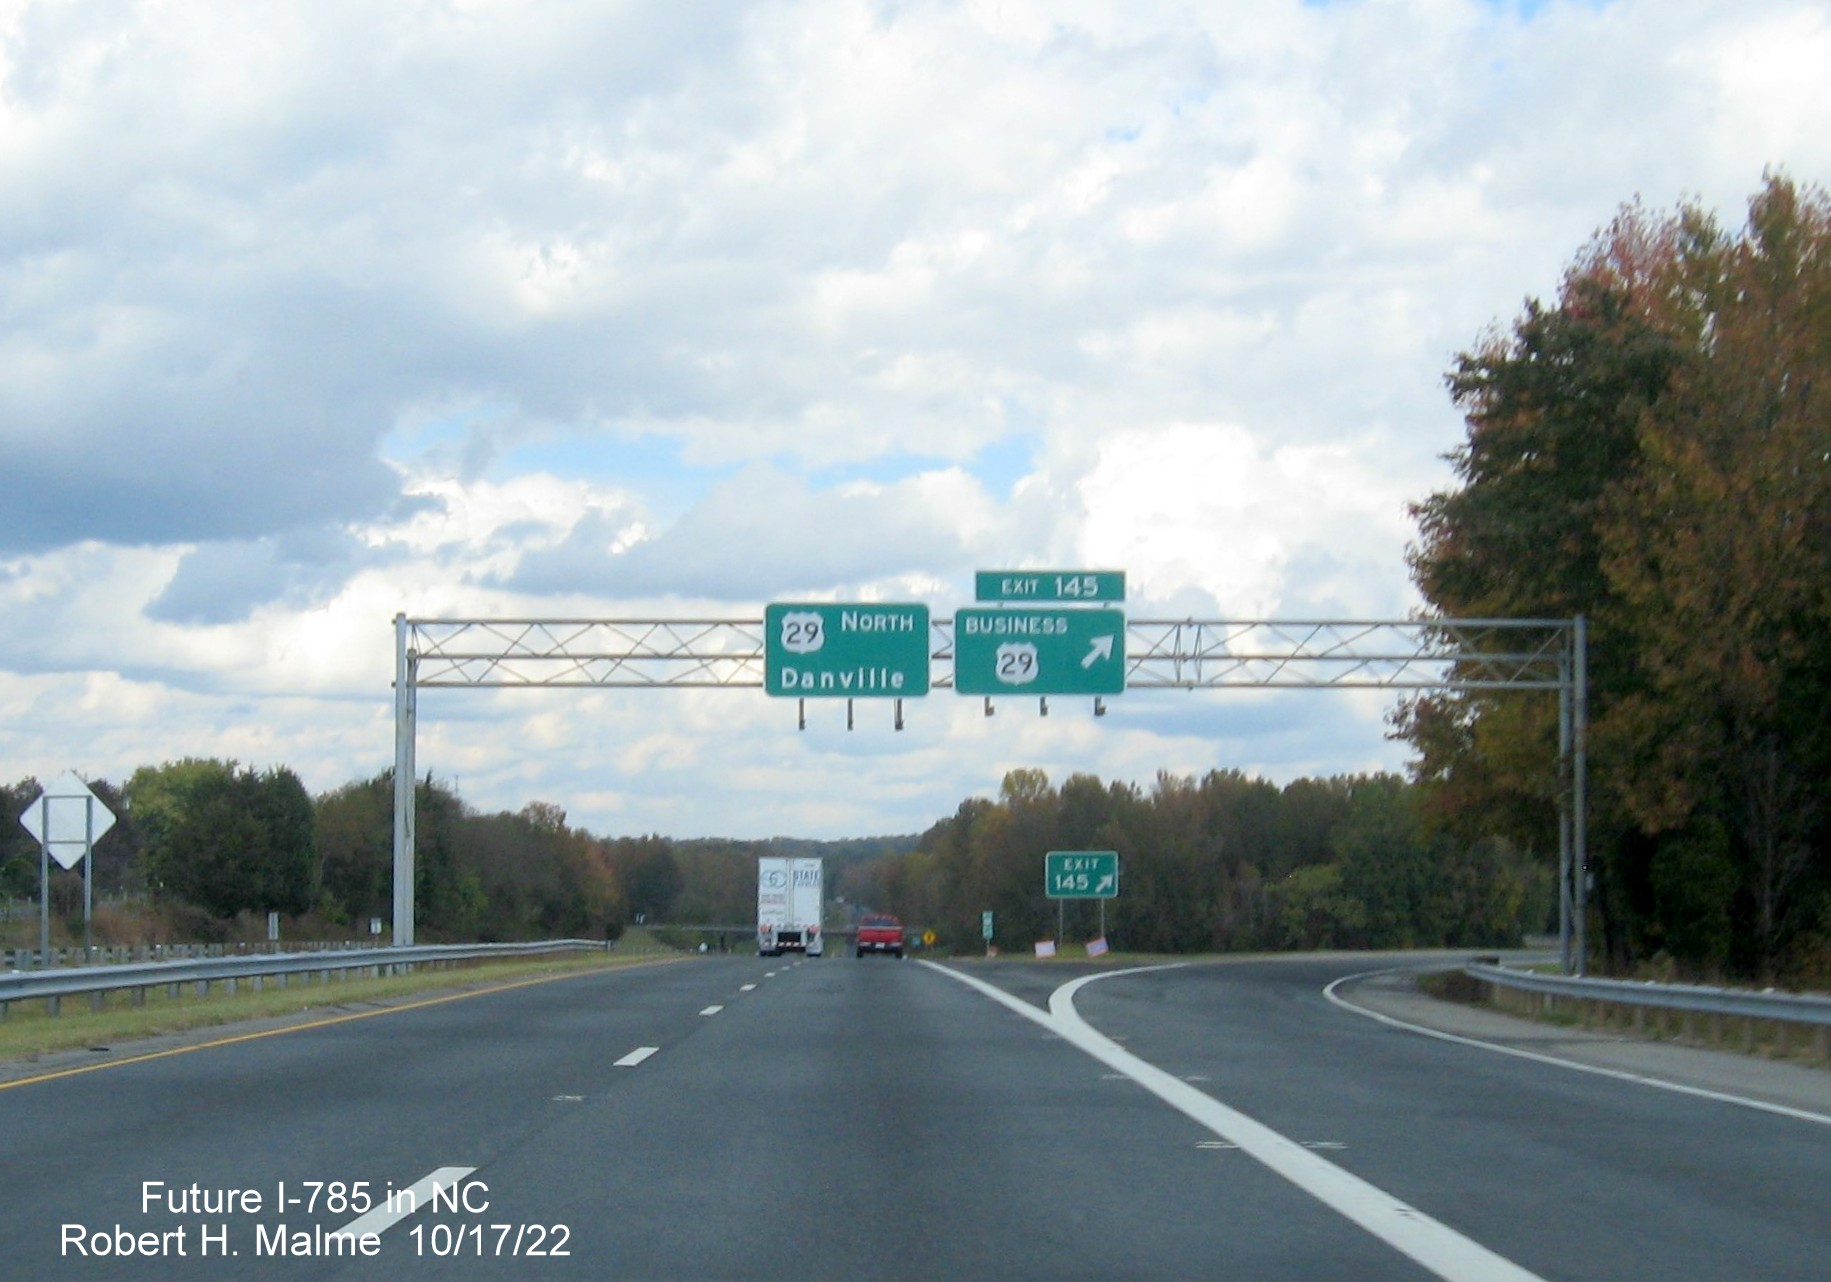 Image of overhead signage at ramp for Business US 29 exit on US 29 (Future I-785) North in Reidsville, October 2022